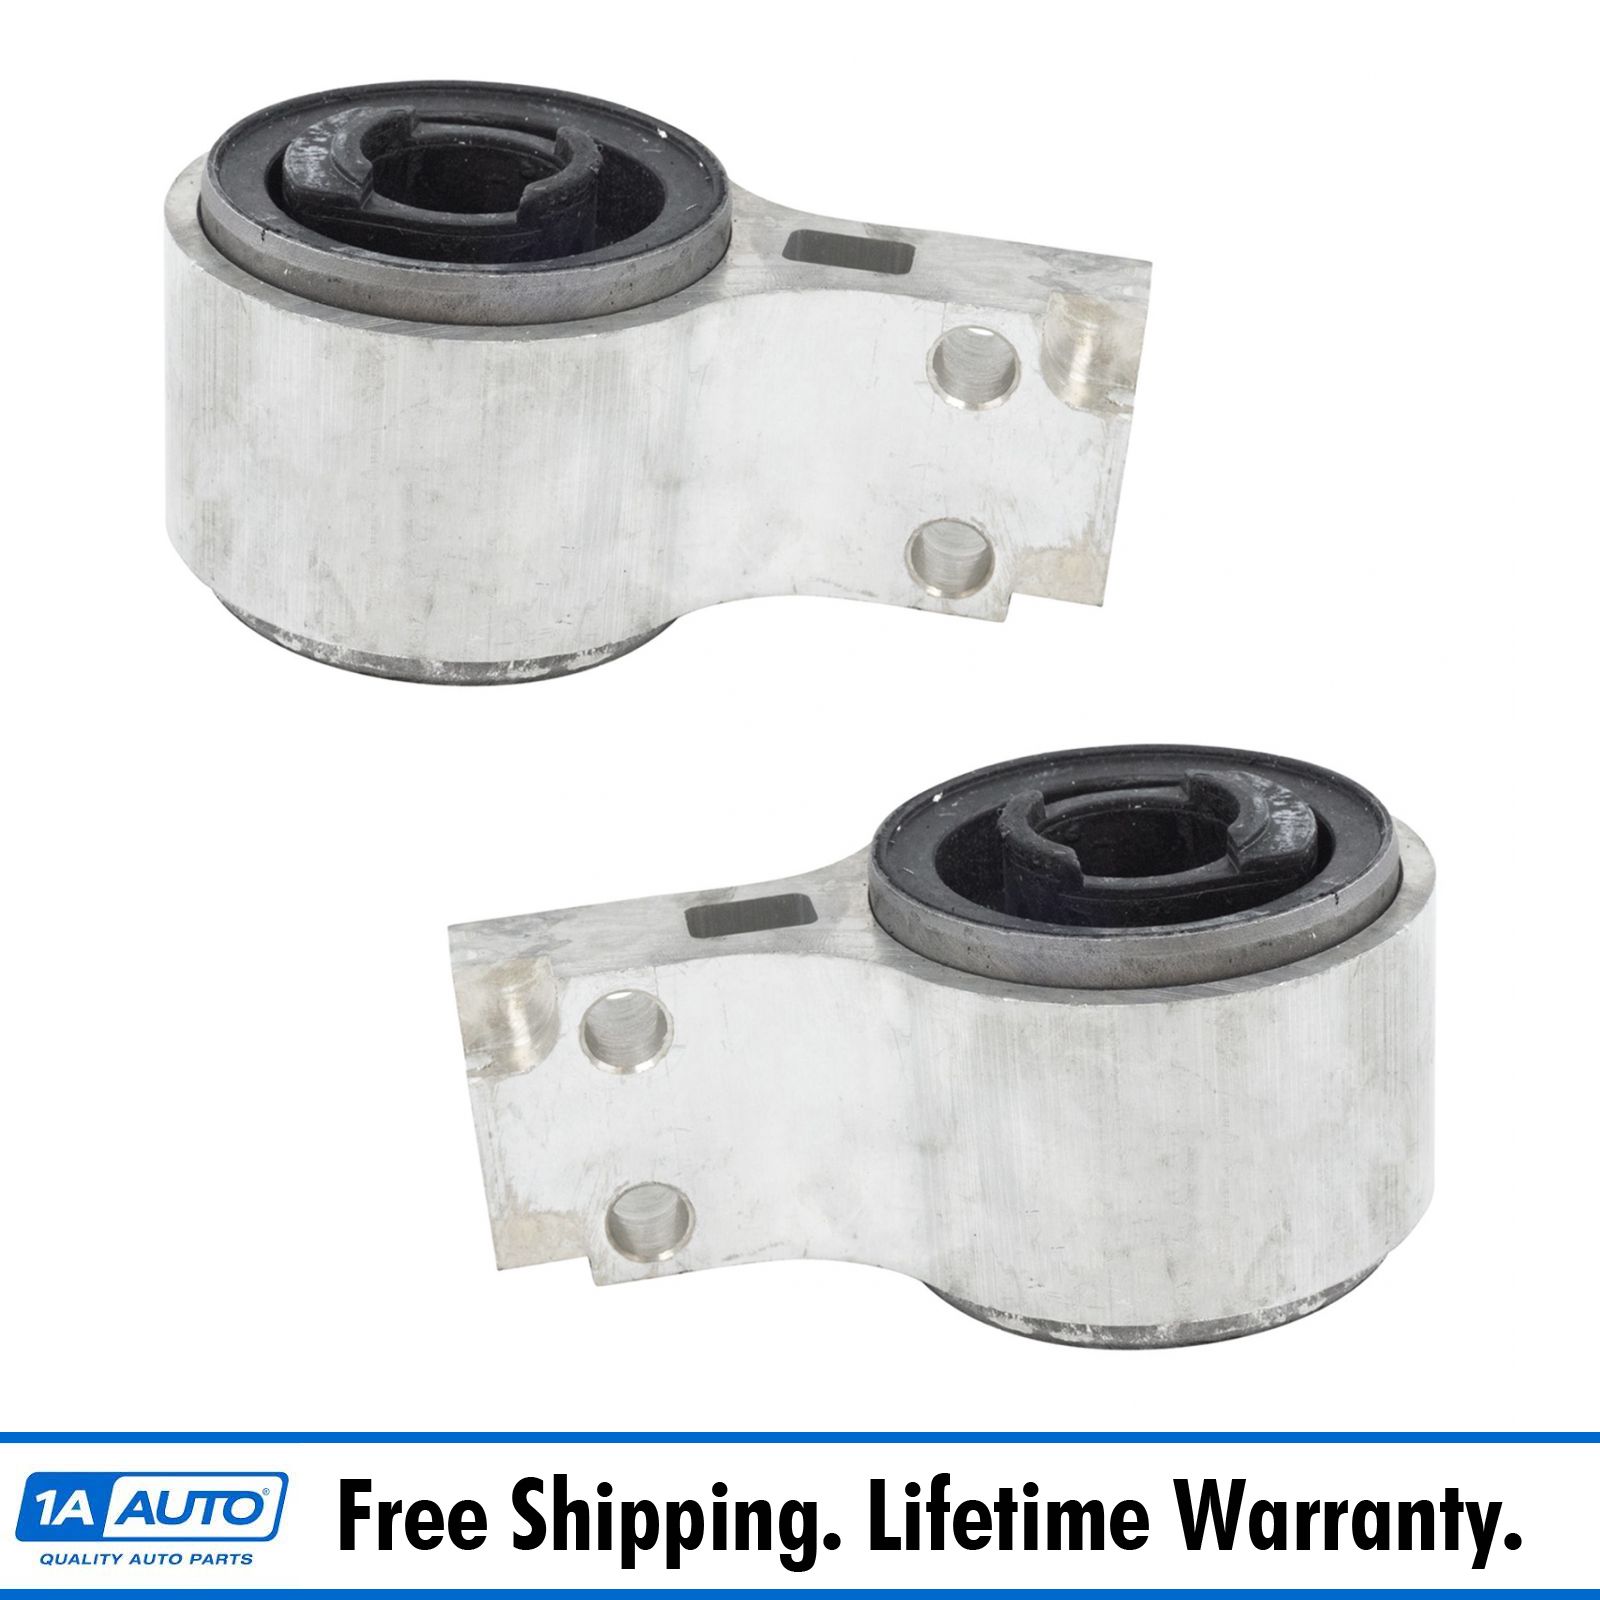 Pair Set 2 Front Lower Moog Susp Control Arm Bushing Kits For Ford LTD Lincoln